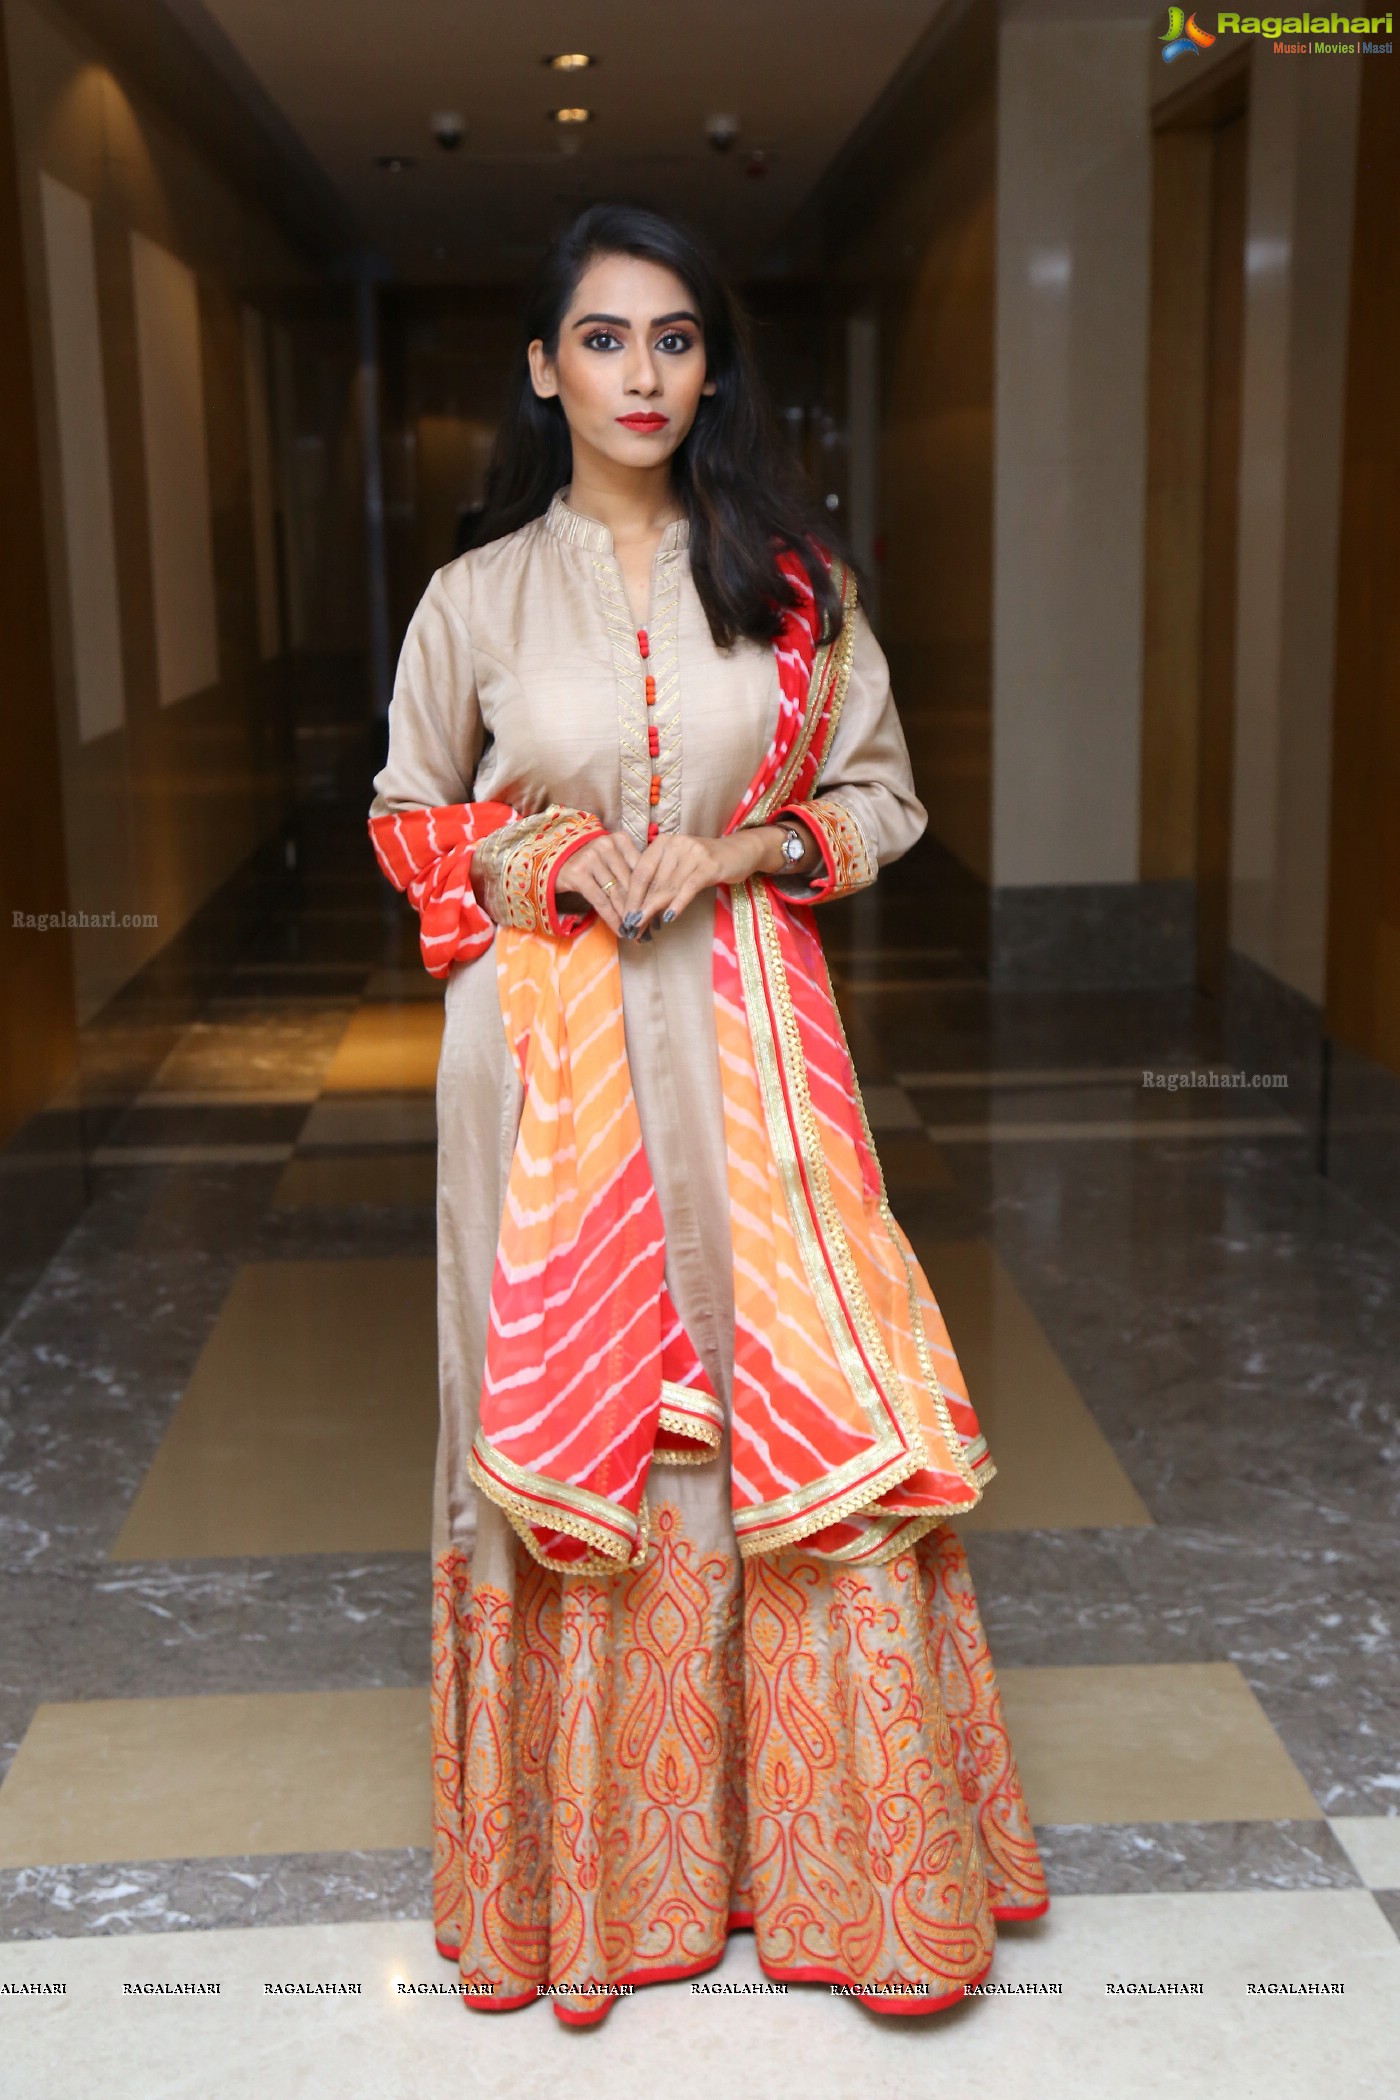 Preethi Singh at Sutraa Designer Fashion Exhibition 2018 (Posters)